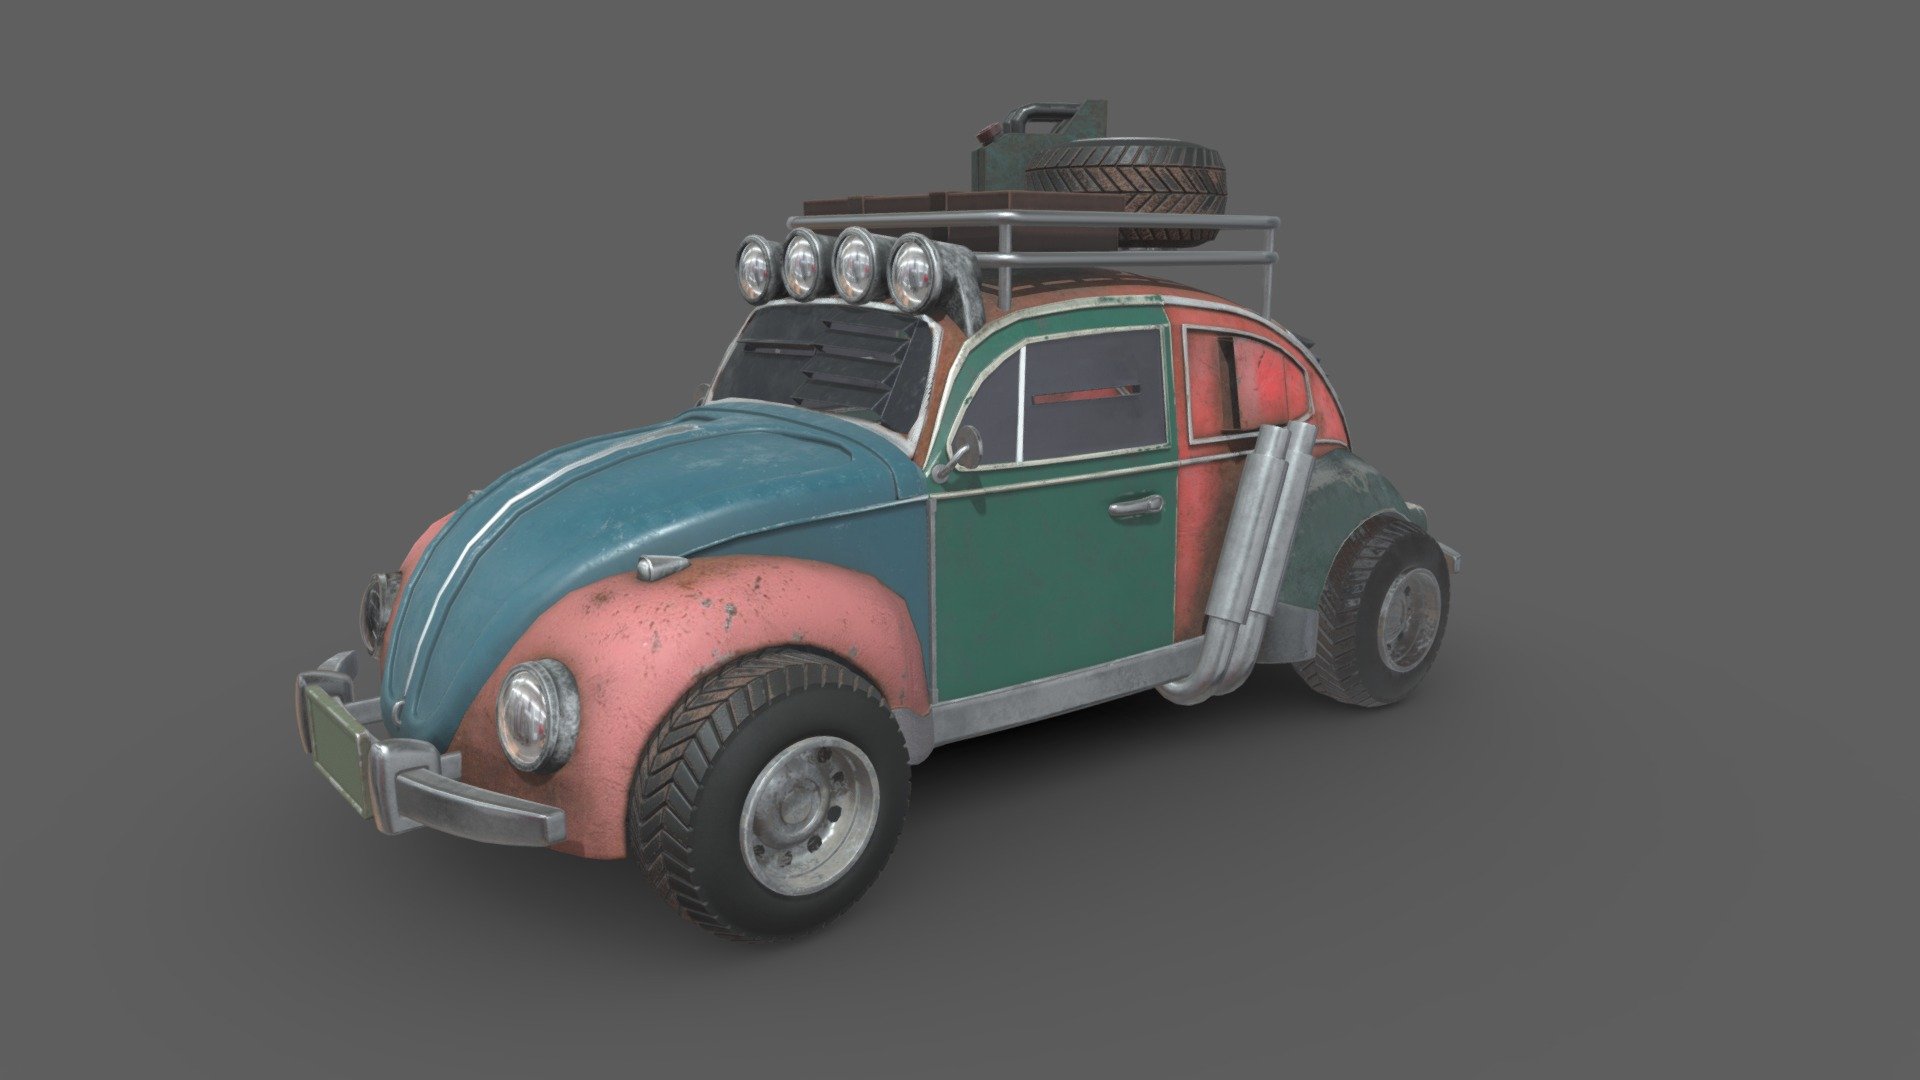 Volkswagen Beetle in the style of mad max Modeled in Maya,
Made during my 3rd year in the Algonquin College Animation Program
Texture in Adobe Substance Painter - BattleBeetle - 3D model by Baileyexe1 3d model